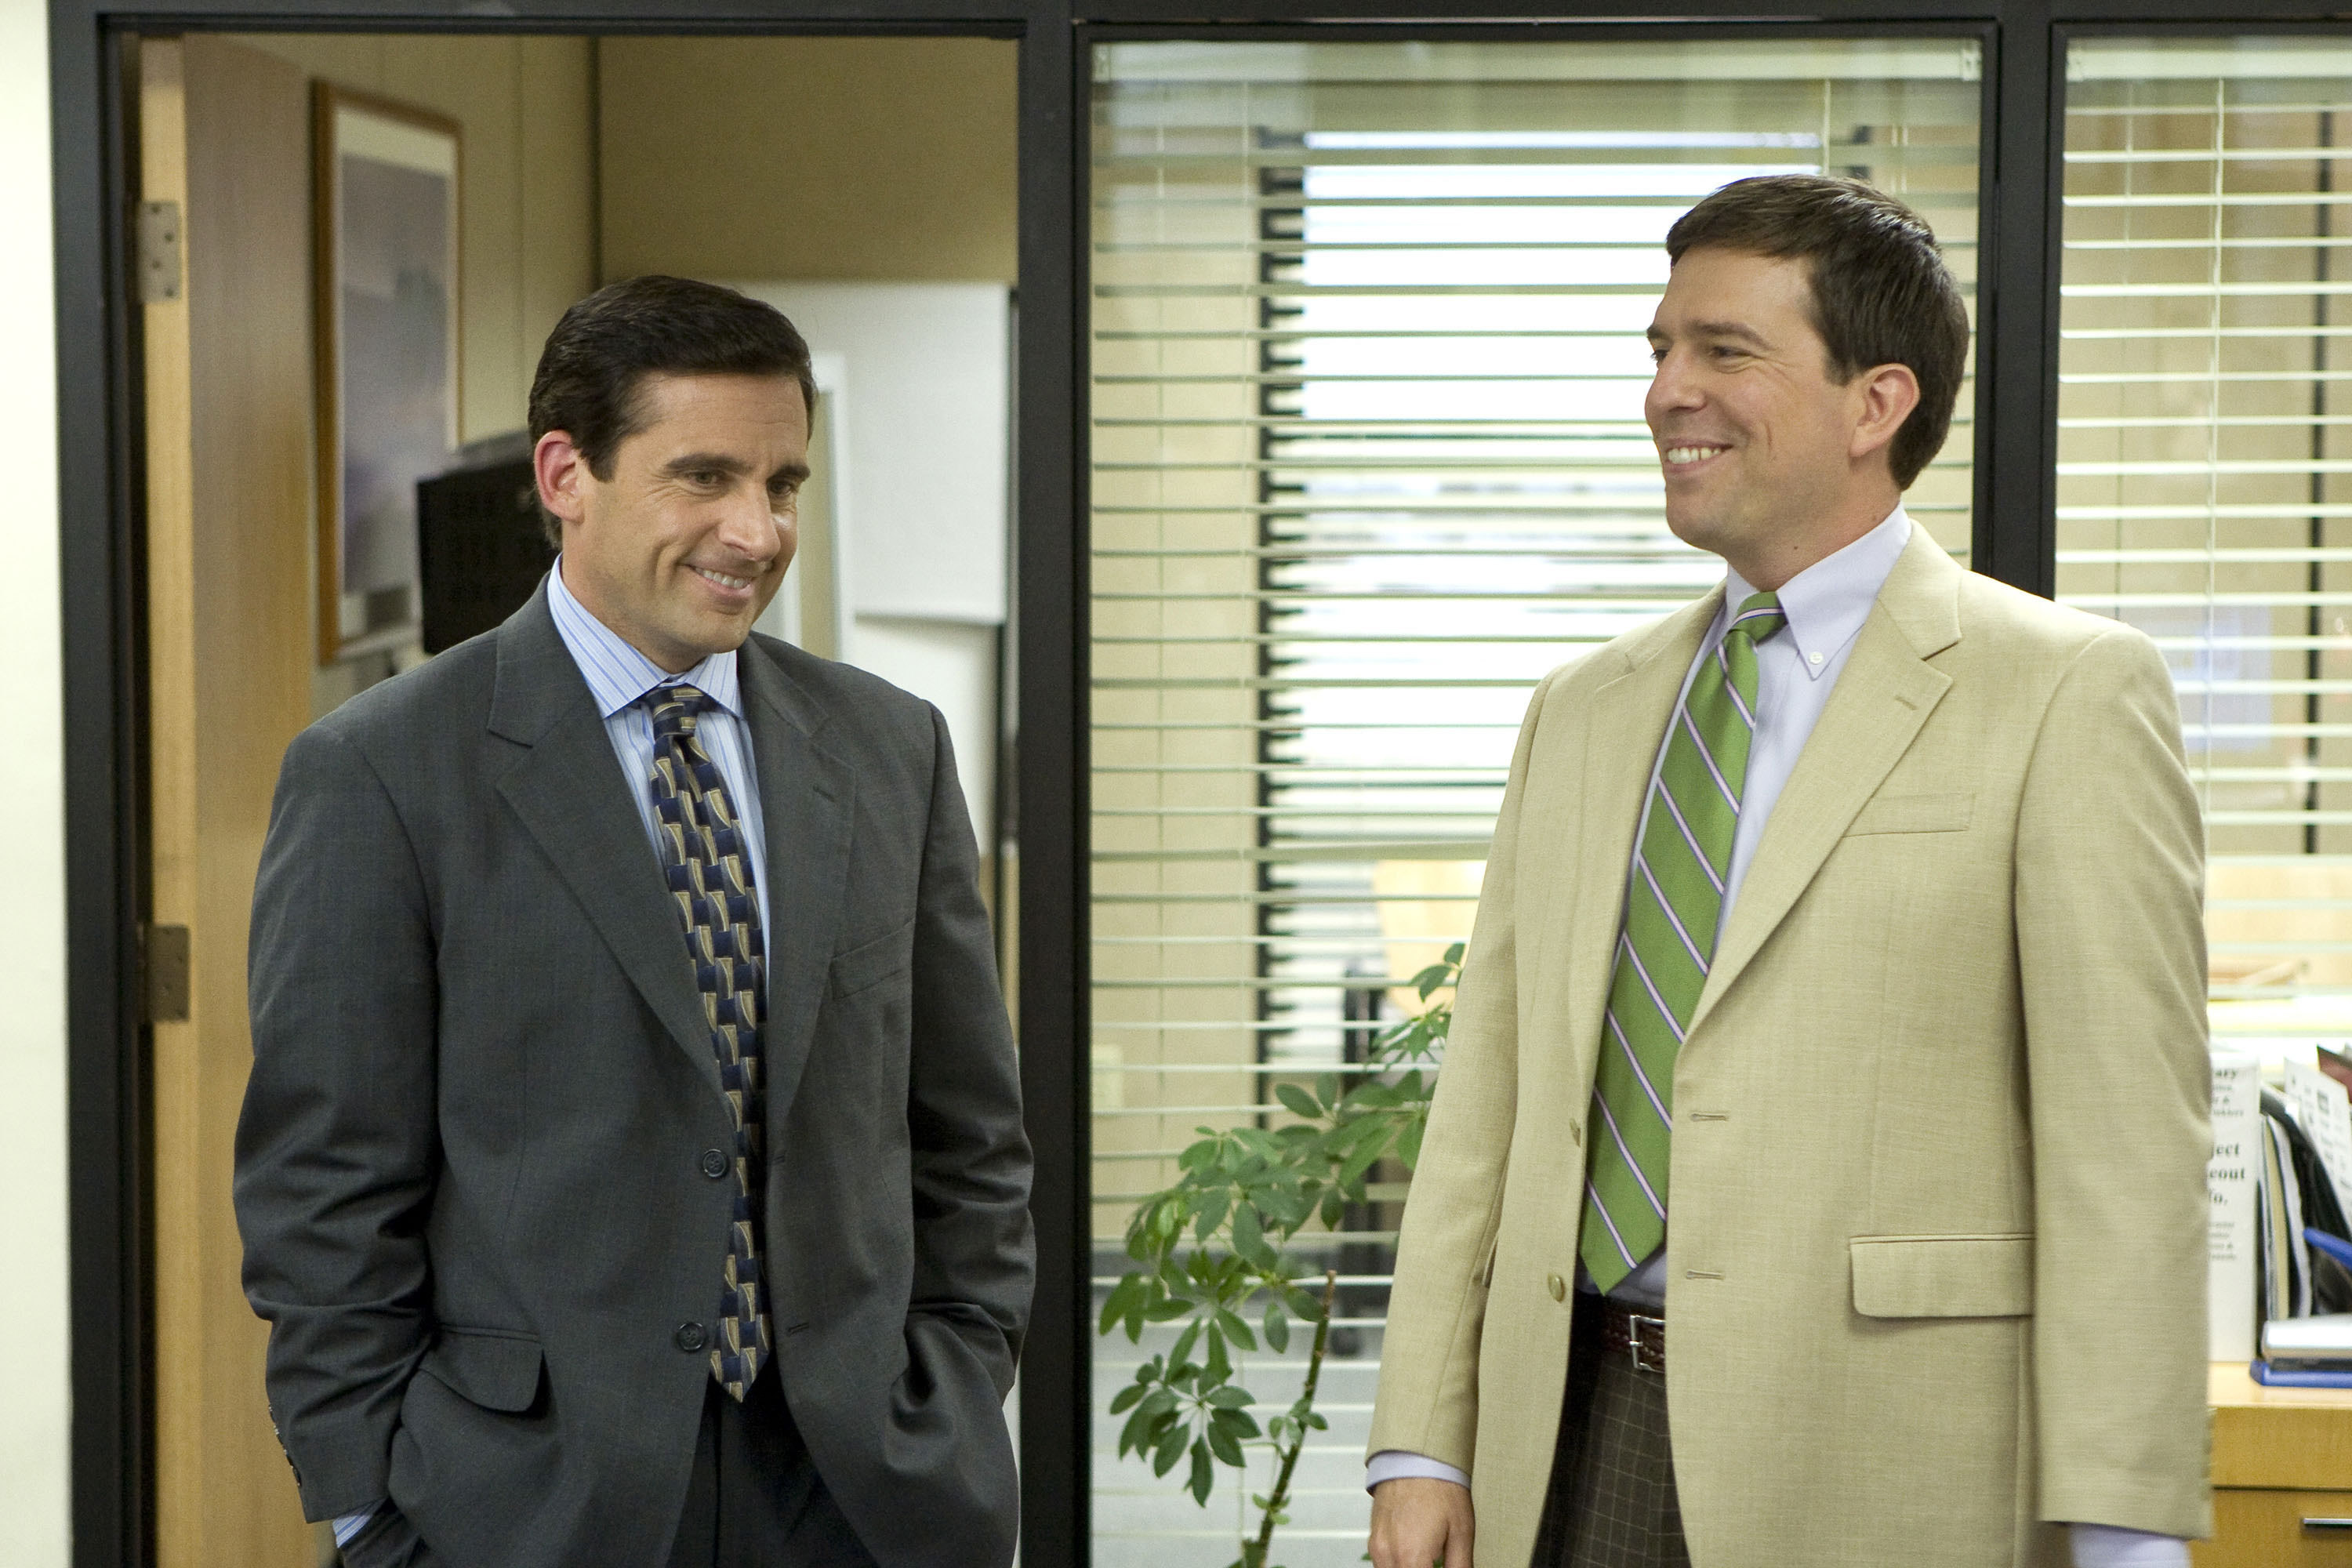 Ed Helms and Steve Carrell in The Office